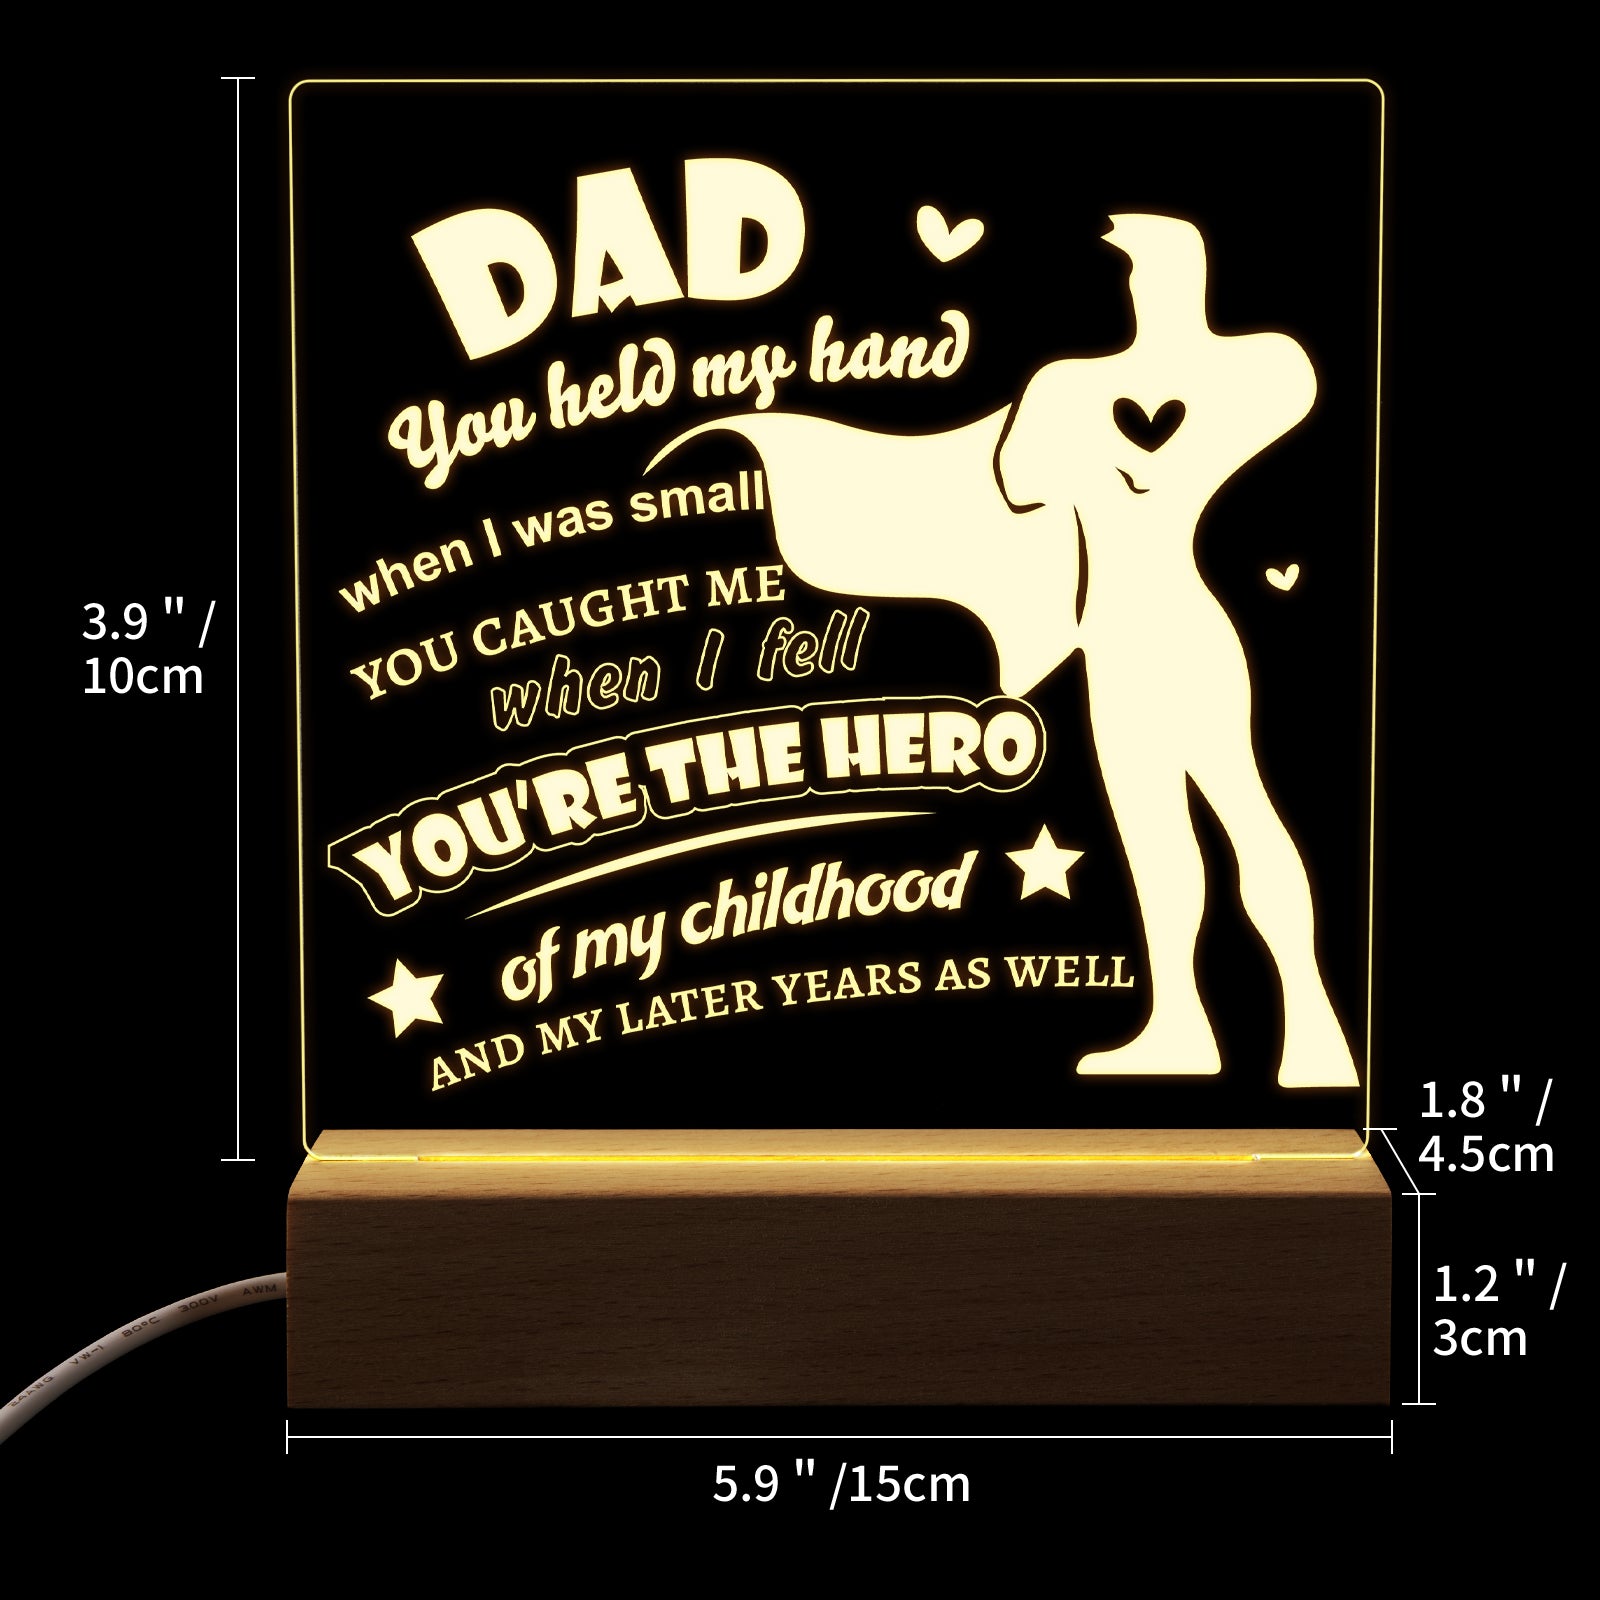 Father's Day - Personalized To My Dad Night Light Father's Day